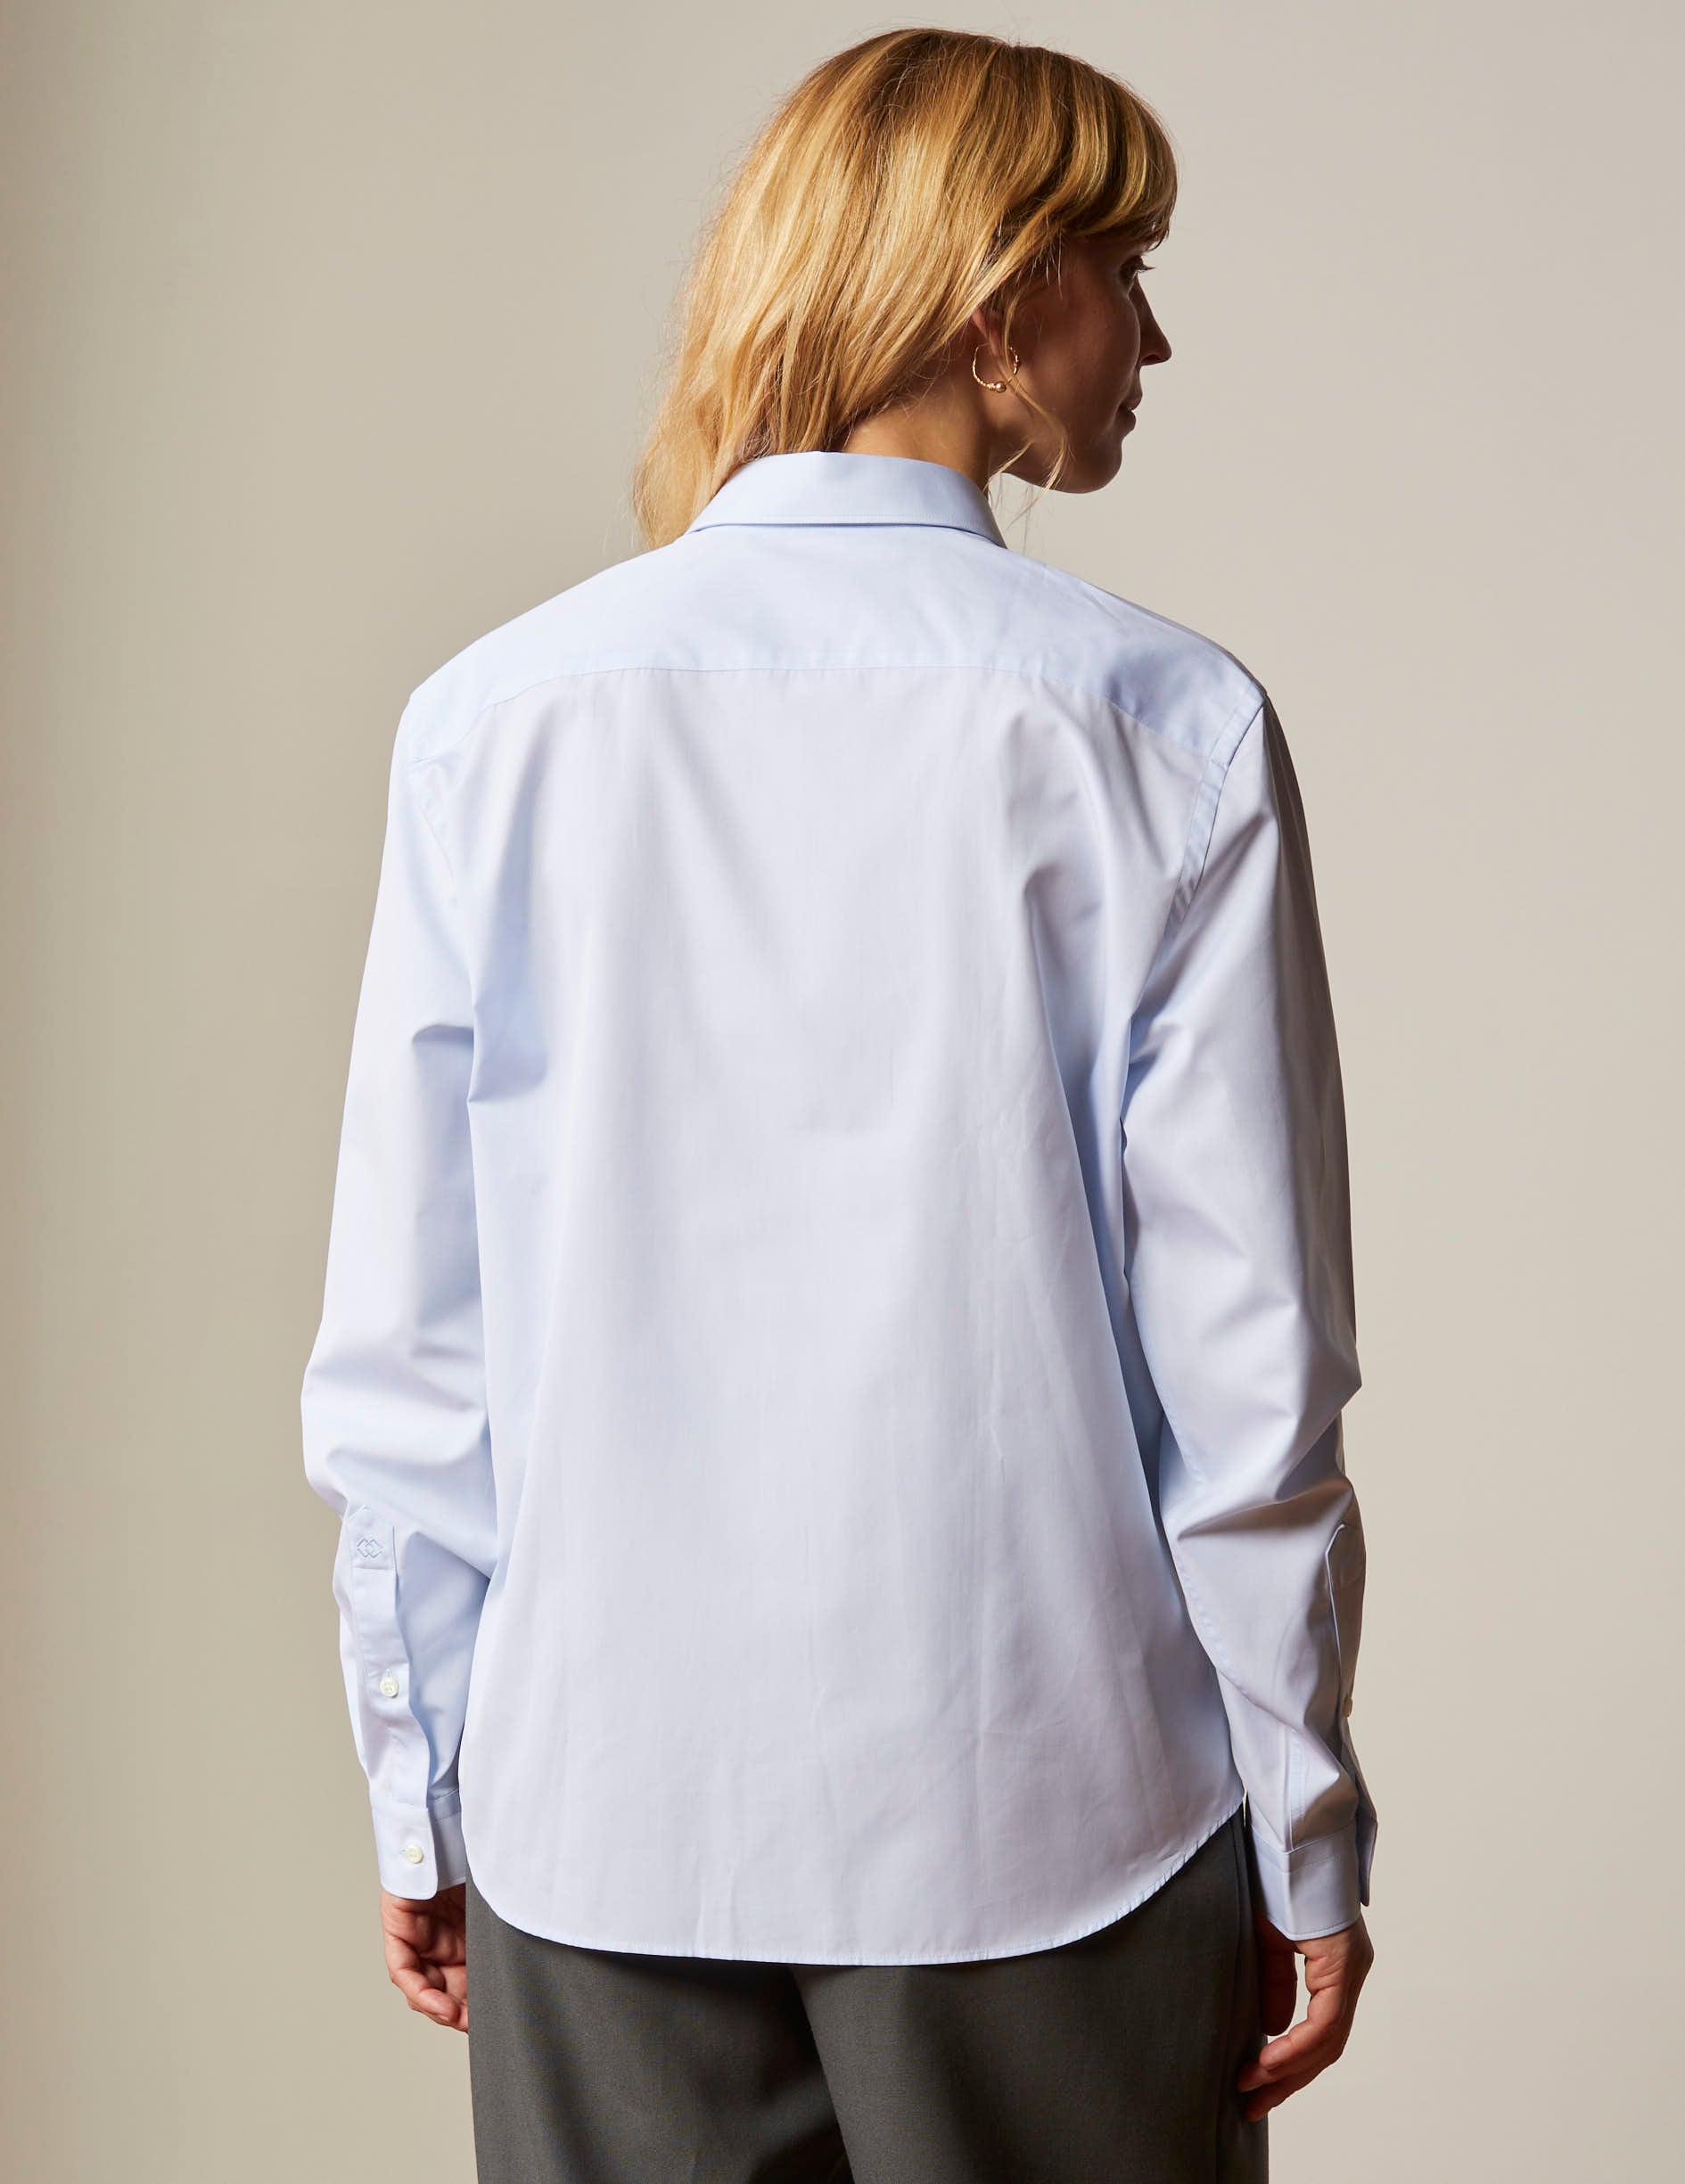 Blue "Je t'aime" shirt with red embroidery - Poplin - Figaret Collar